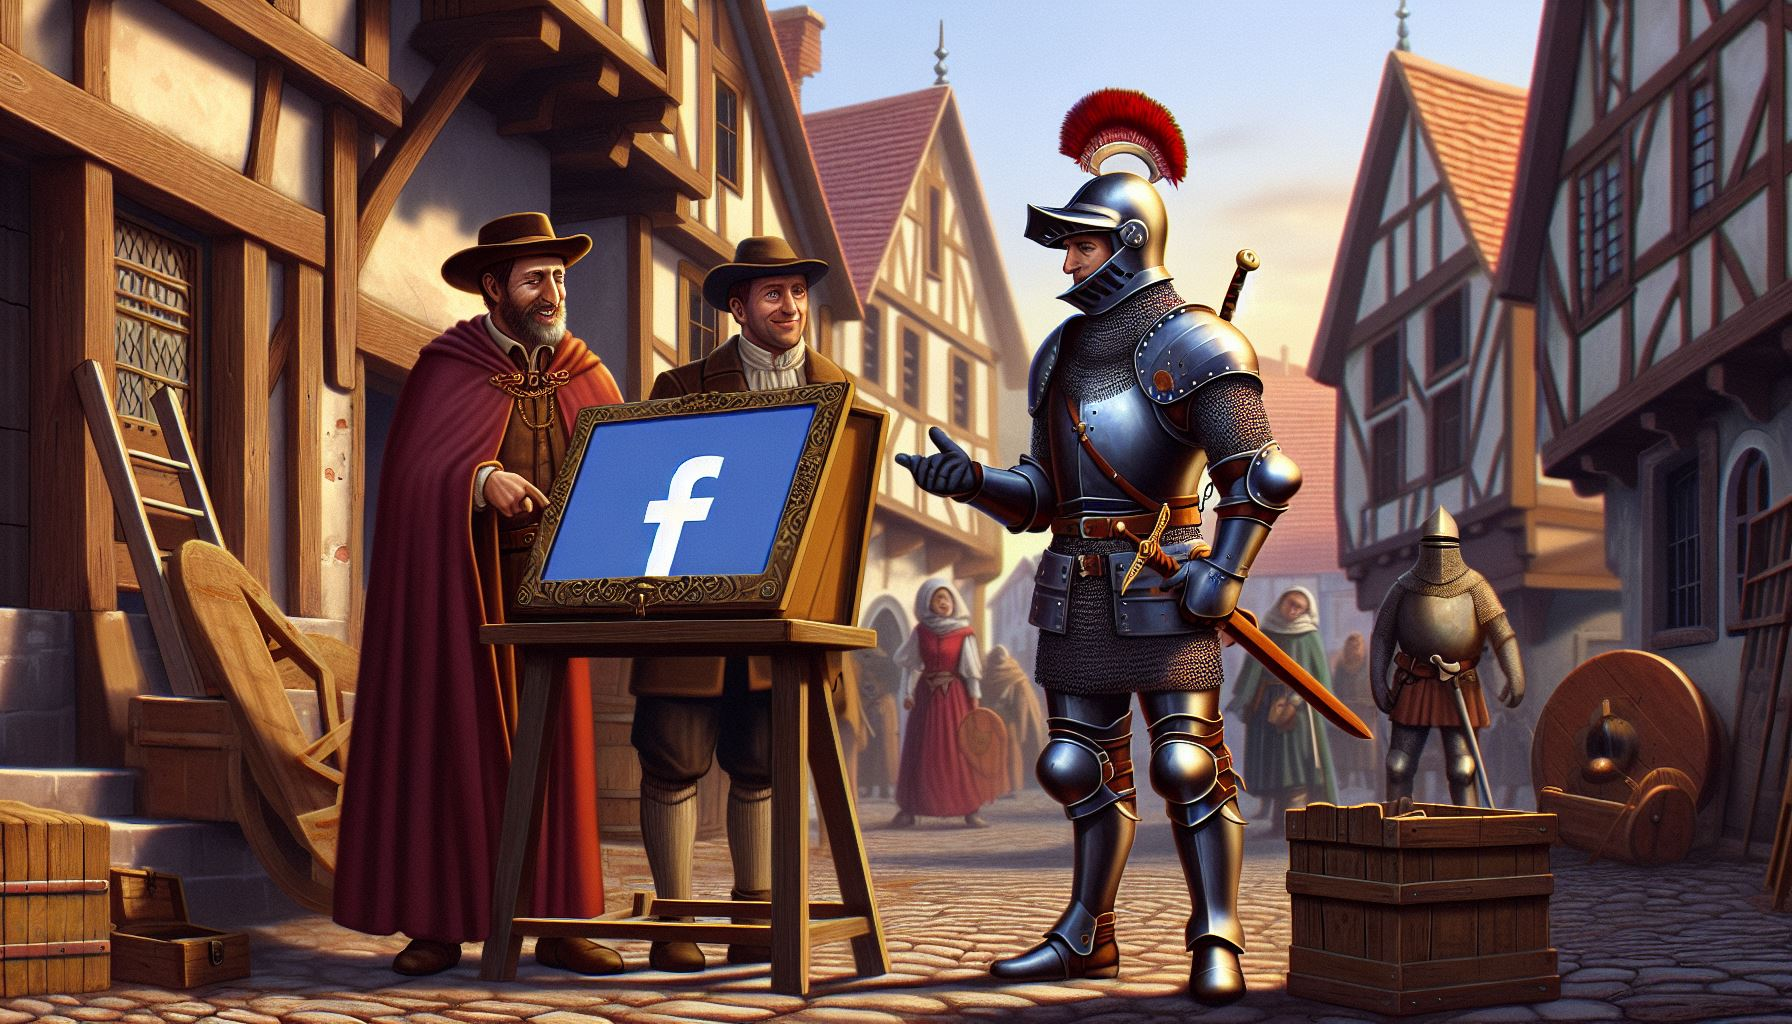 How Facebook is explained to a medieval knight?